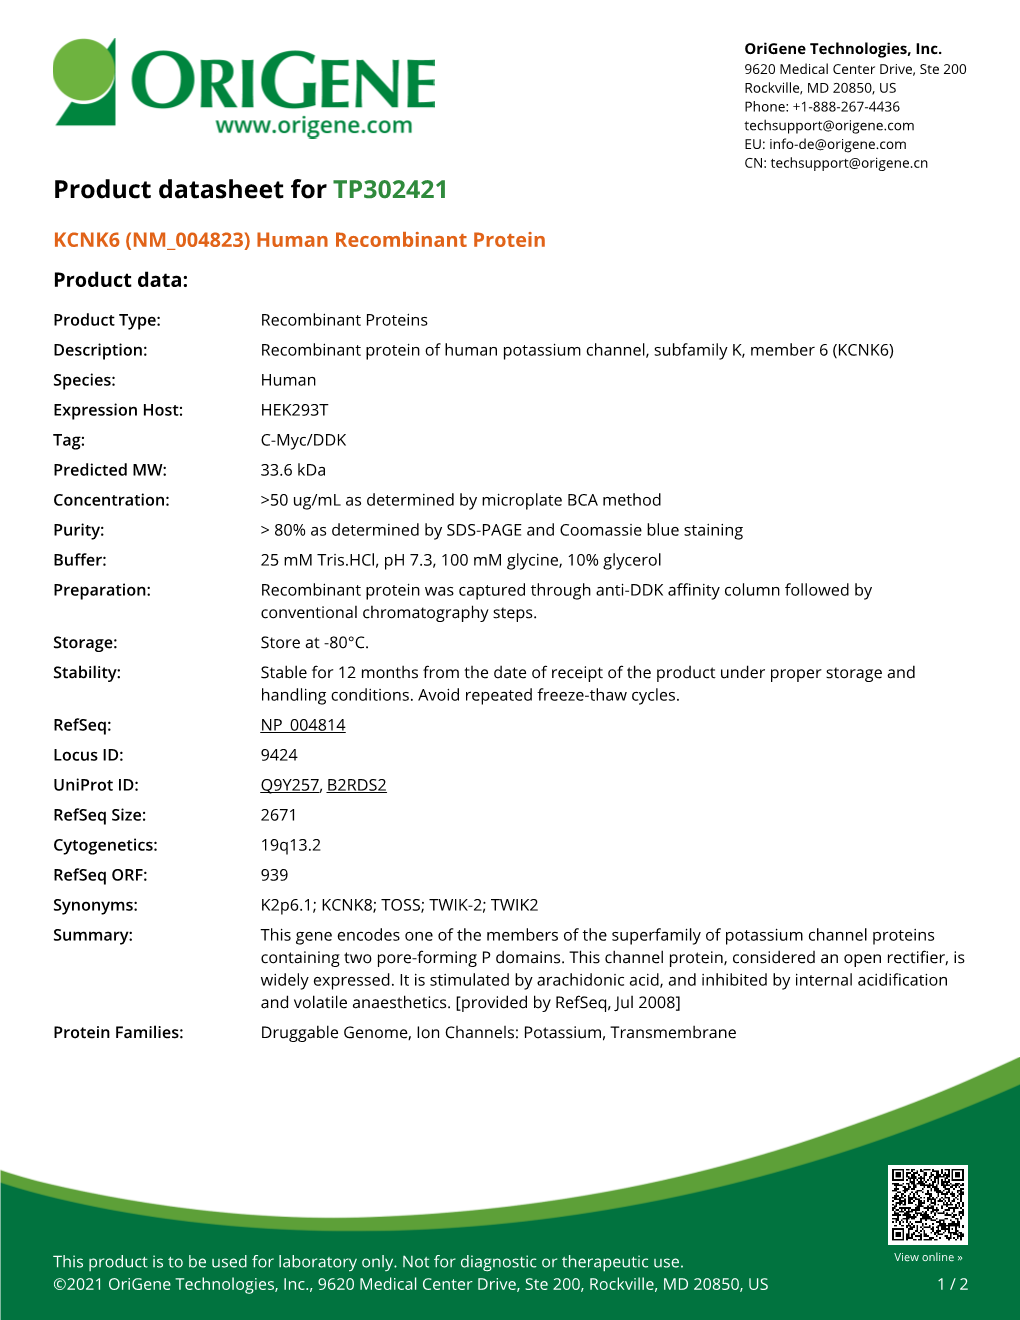 KCNK6 (NM 004823) Human Recombinant Protein Product Data